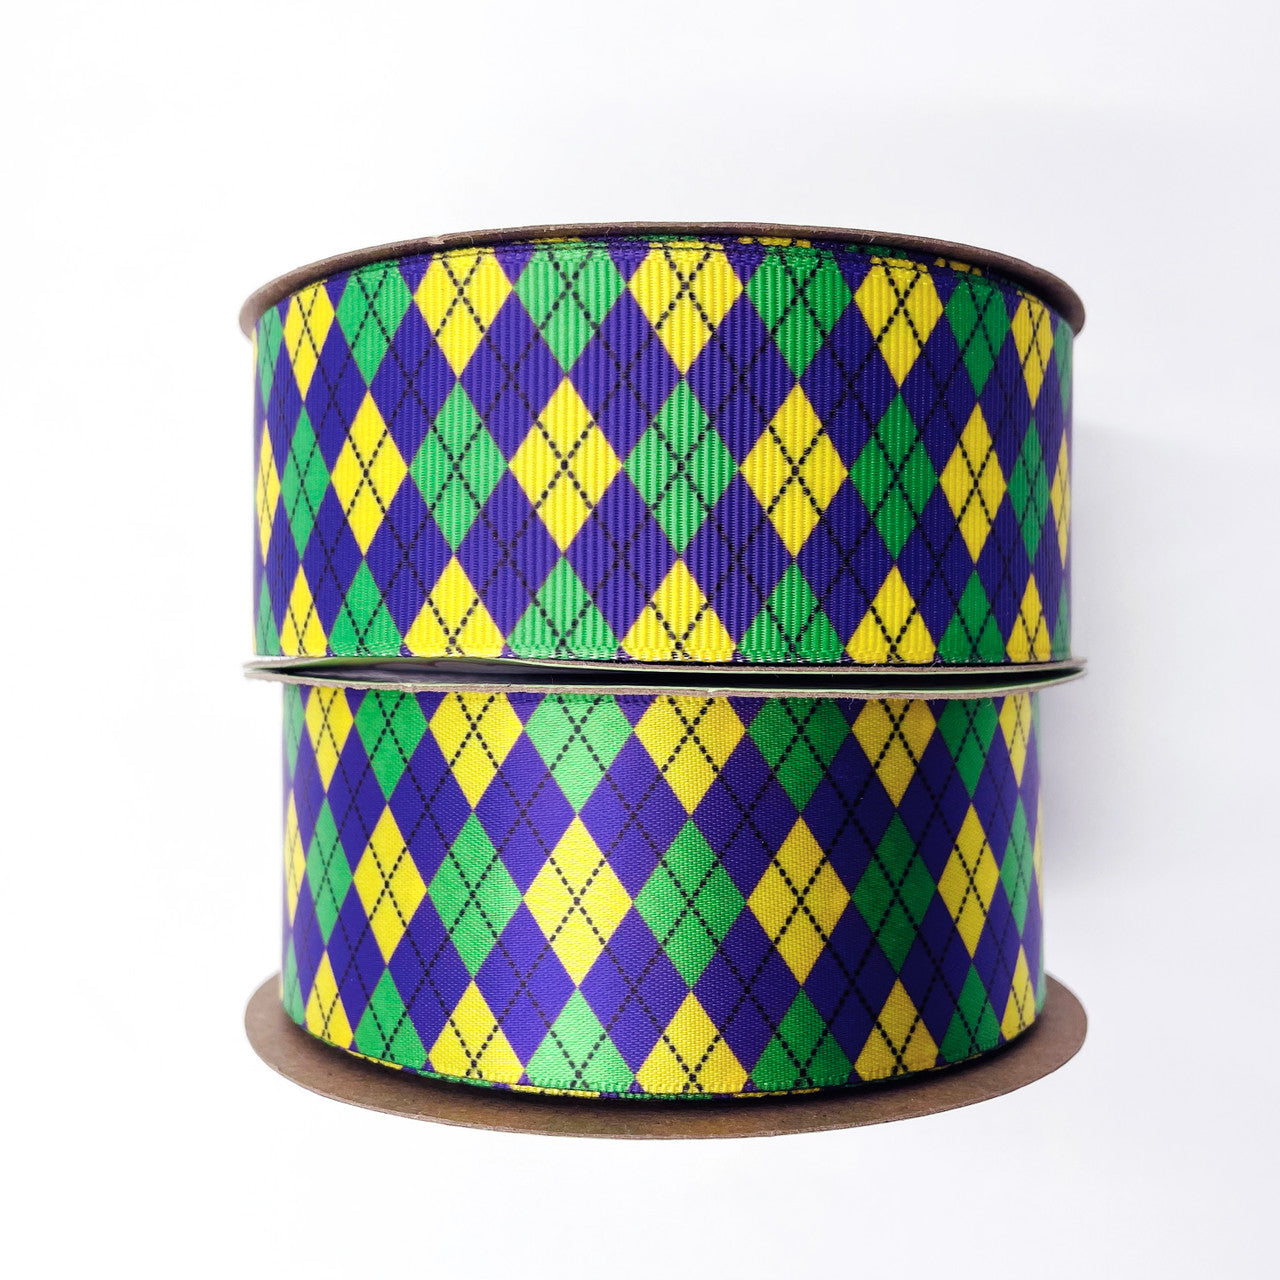 Our Mardi Gras themed argyle ribbon is available in 1.5" wide satin and grosgrain ribbons! 